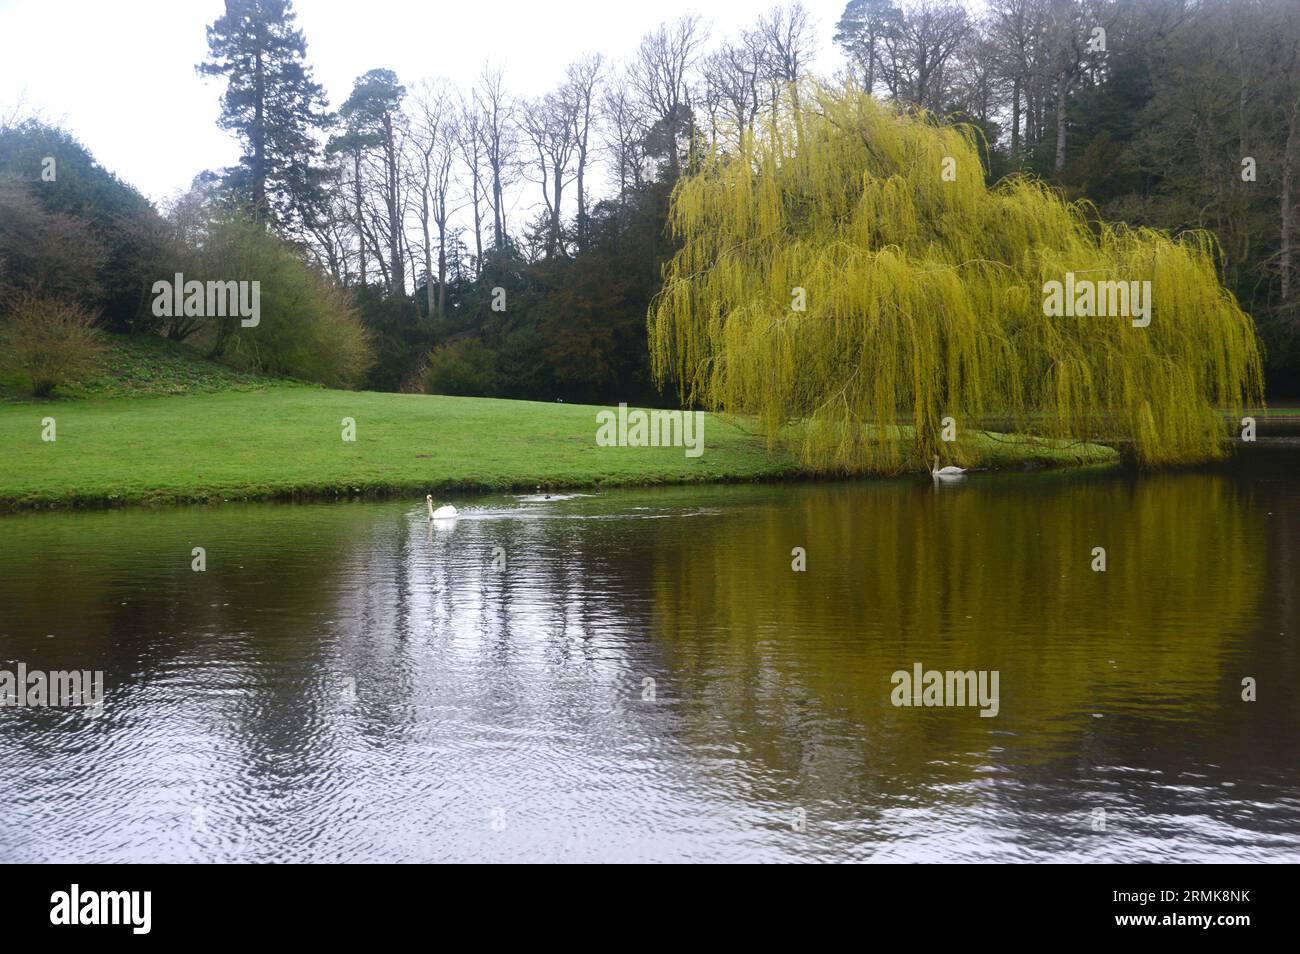 Reflections of a Weeping Willow Tree and Swan on the River Skell at Fountains Abbey and Studley Royal Water Garden, North Yorkshire, Inghilterra, Regno Unito. Foto Stock